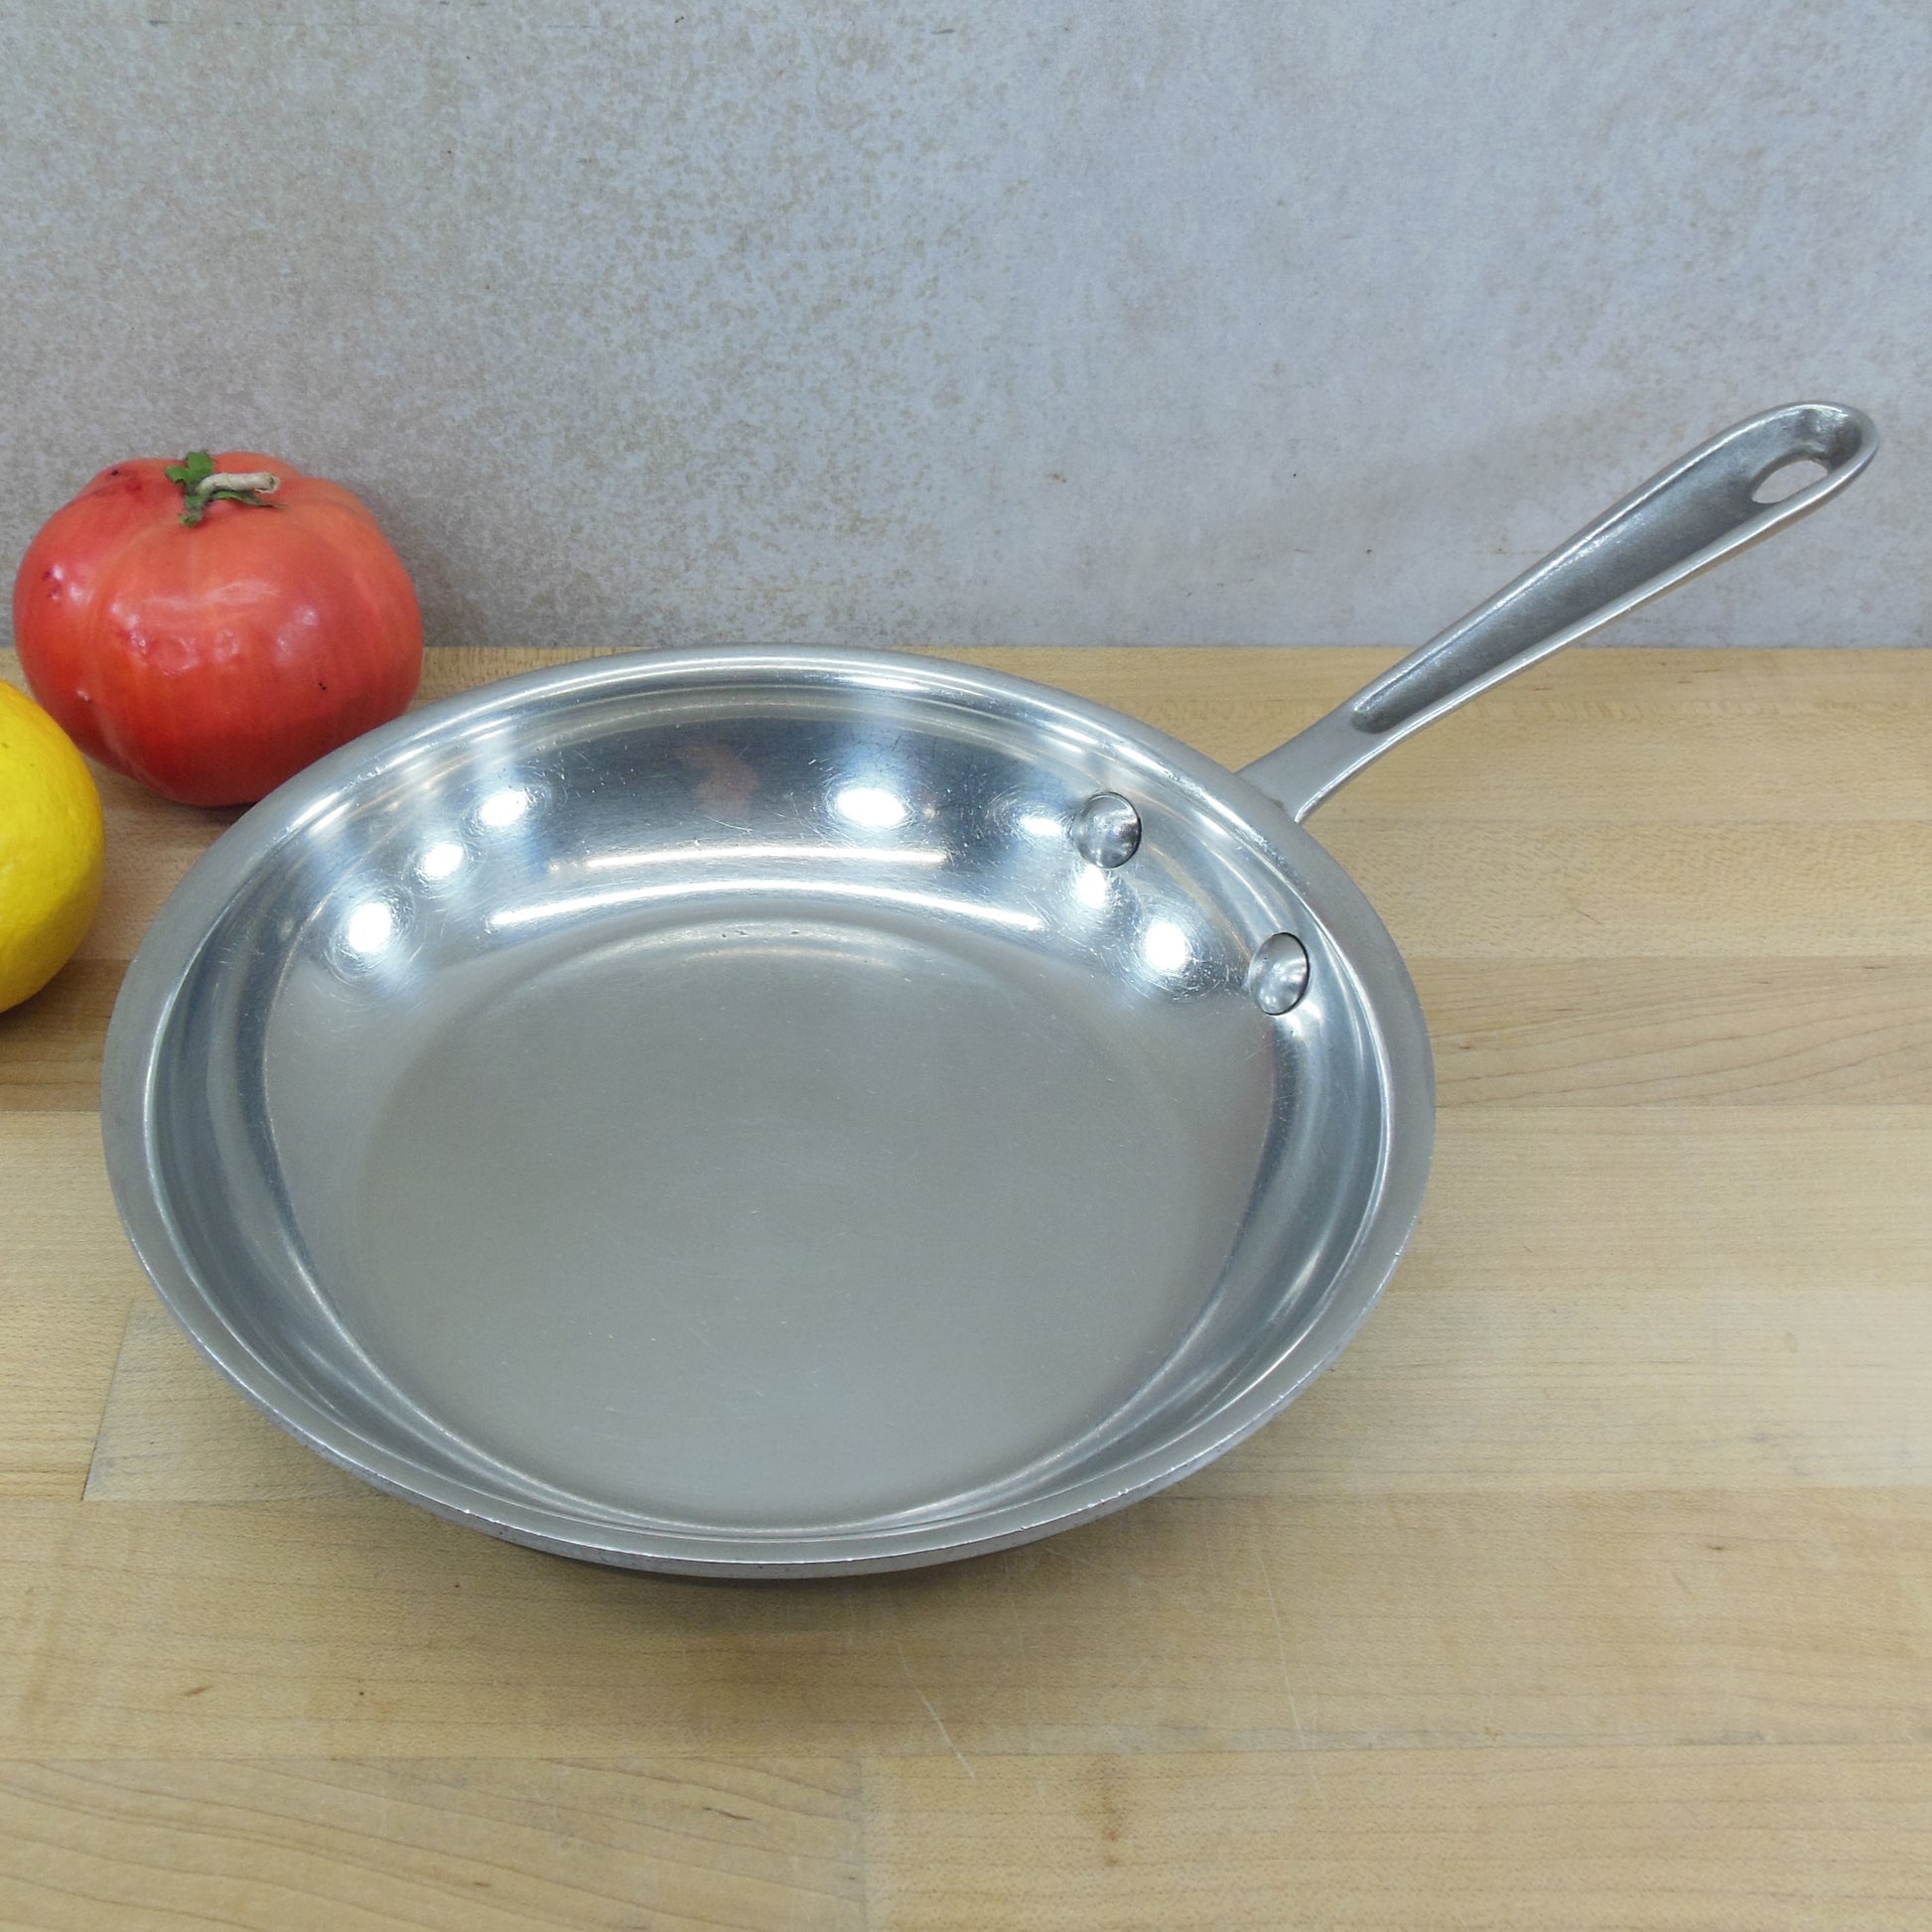 All-Clad 8 Stainless Steel Fry Pan